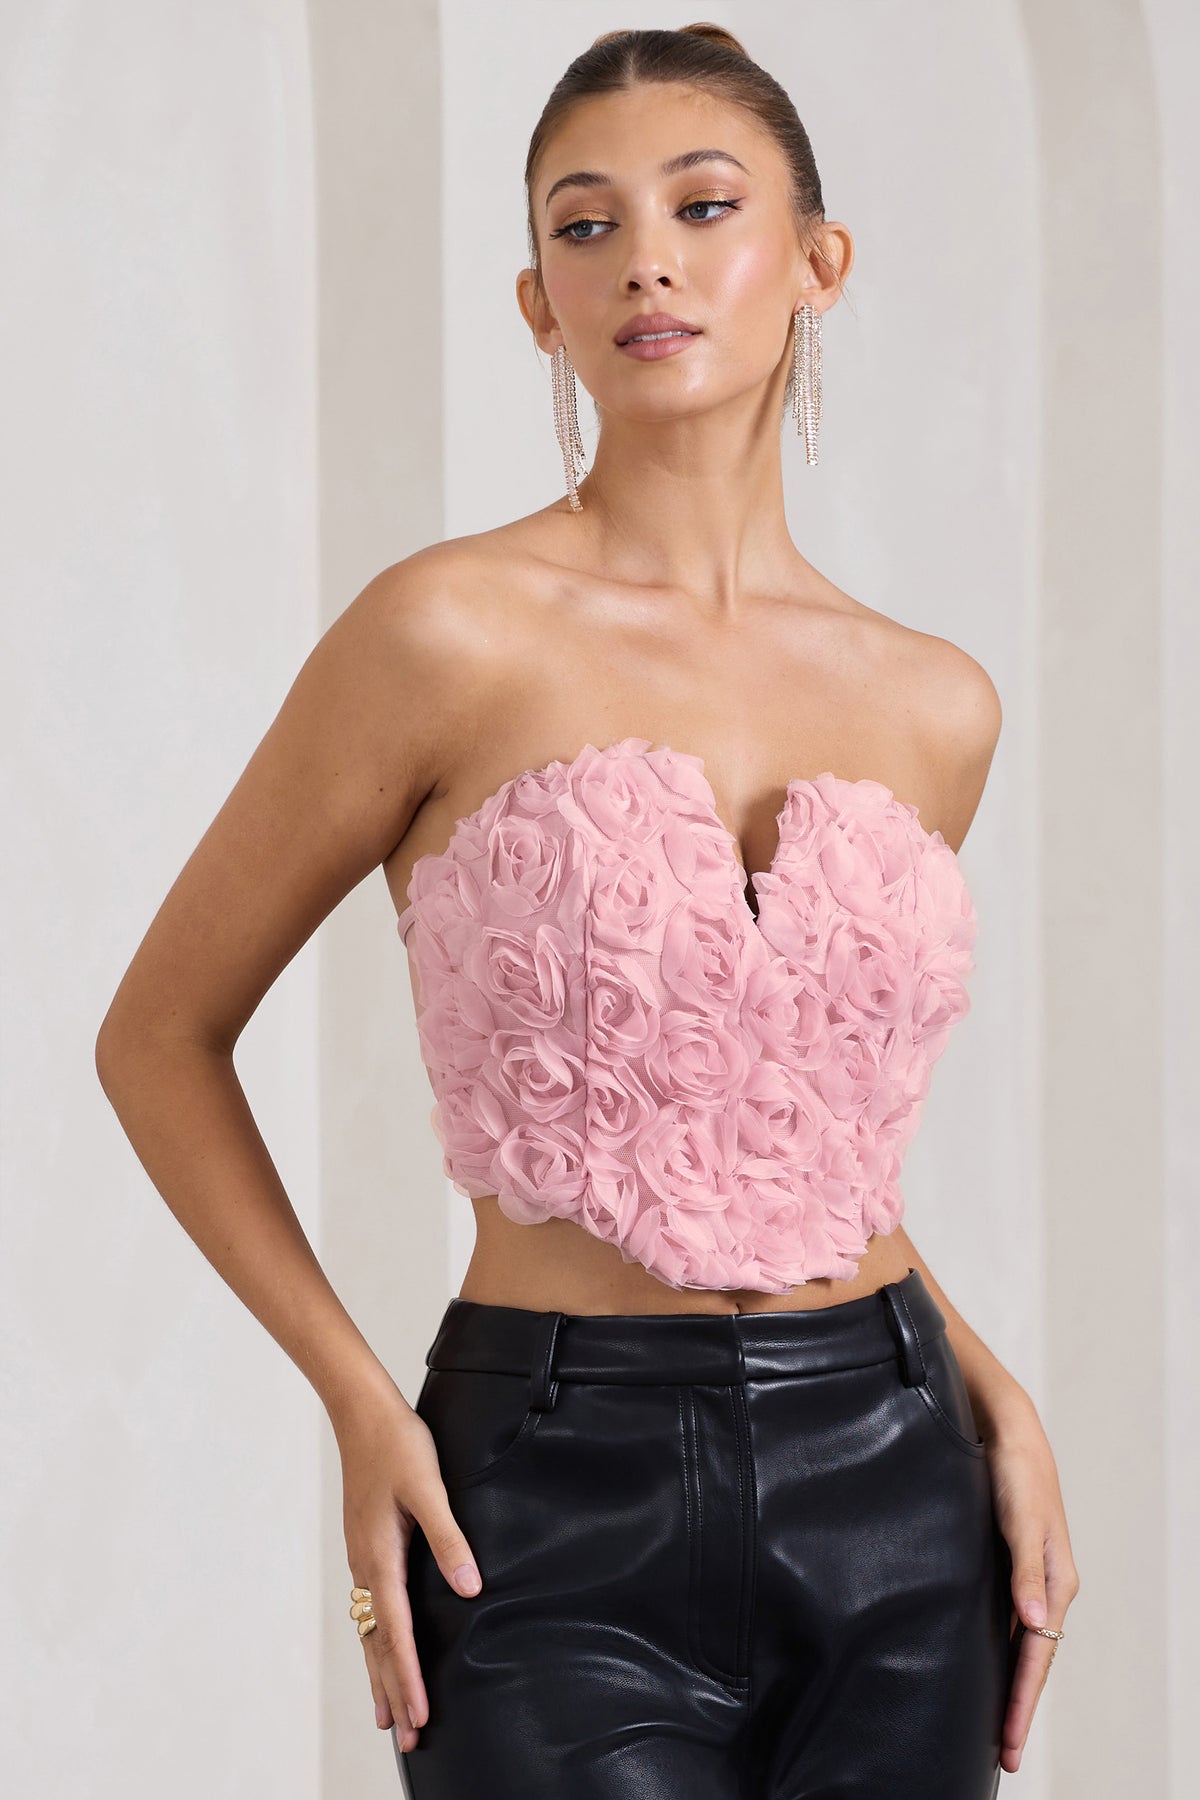 Shop Women's Pink Floral Corset Top and Pants